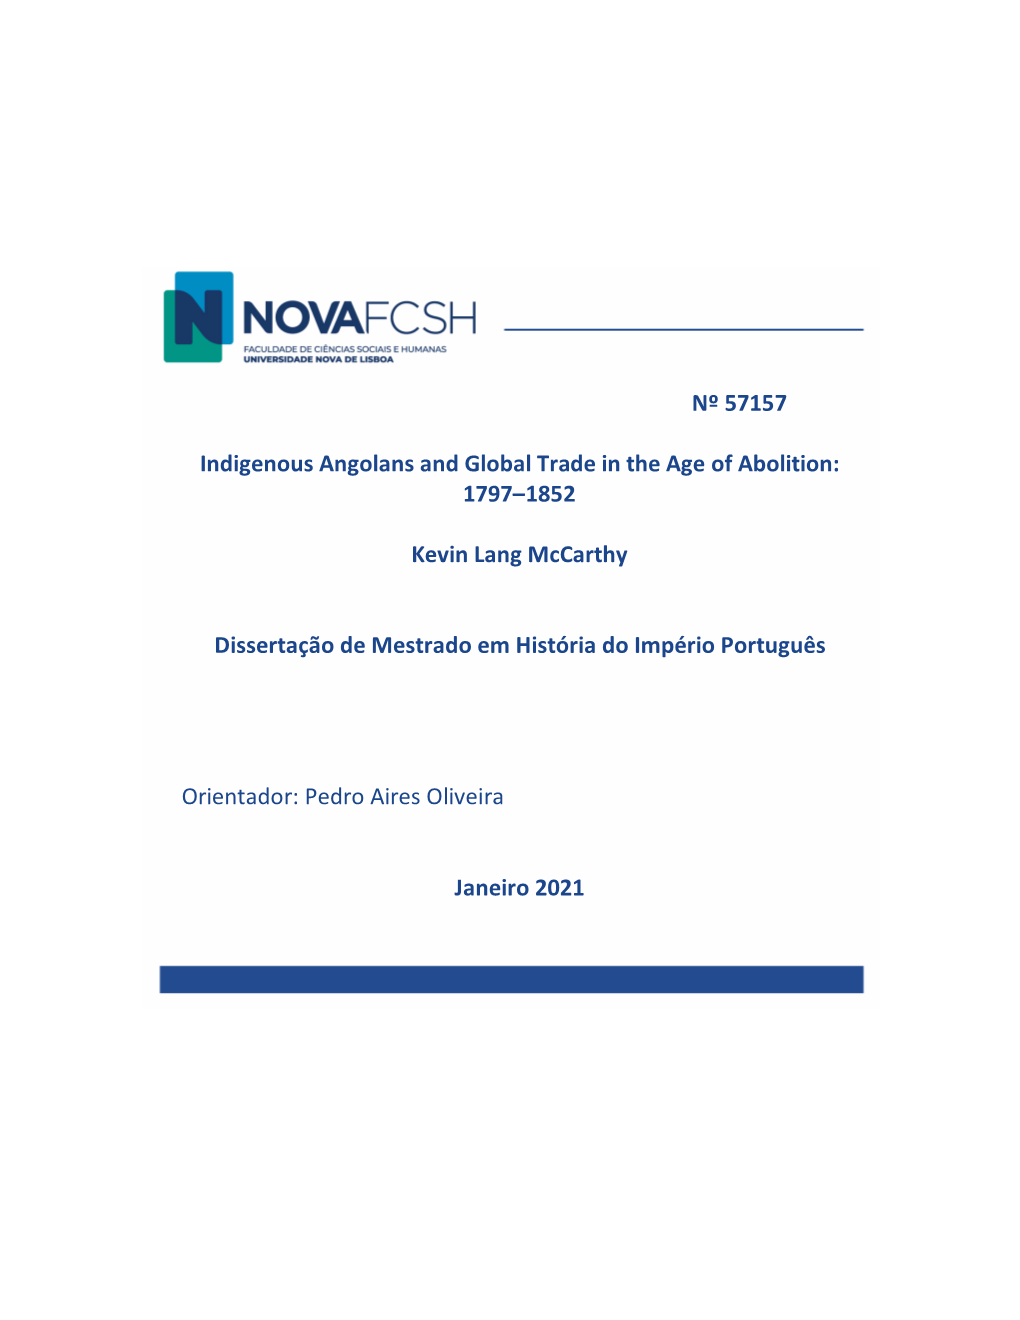 Nº 57157 Indigenous Angolans and Global Trade in The